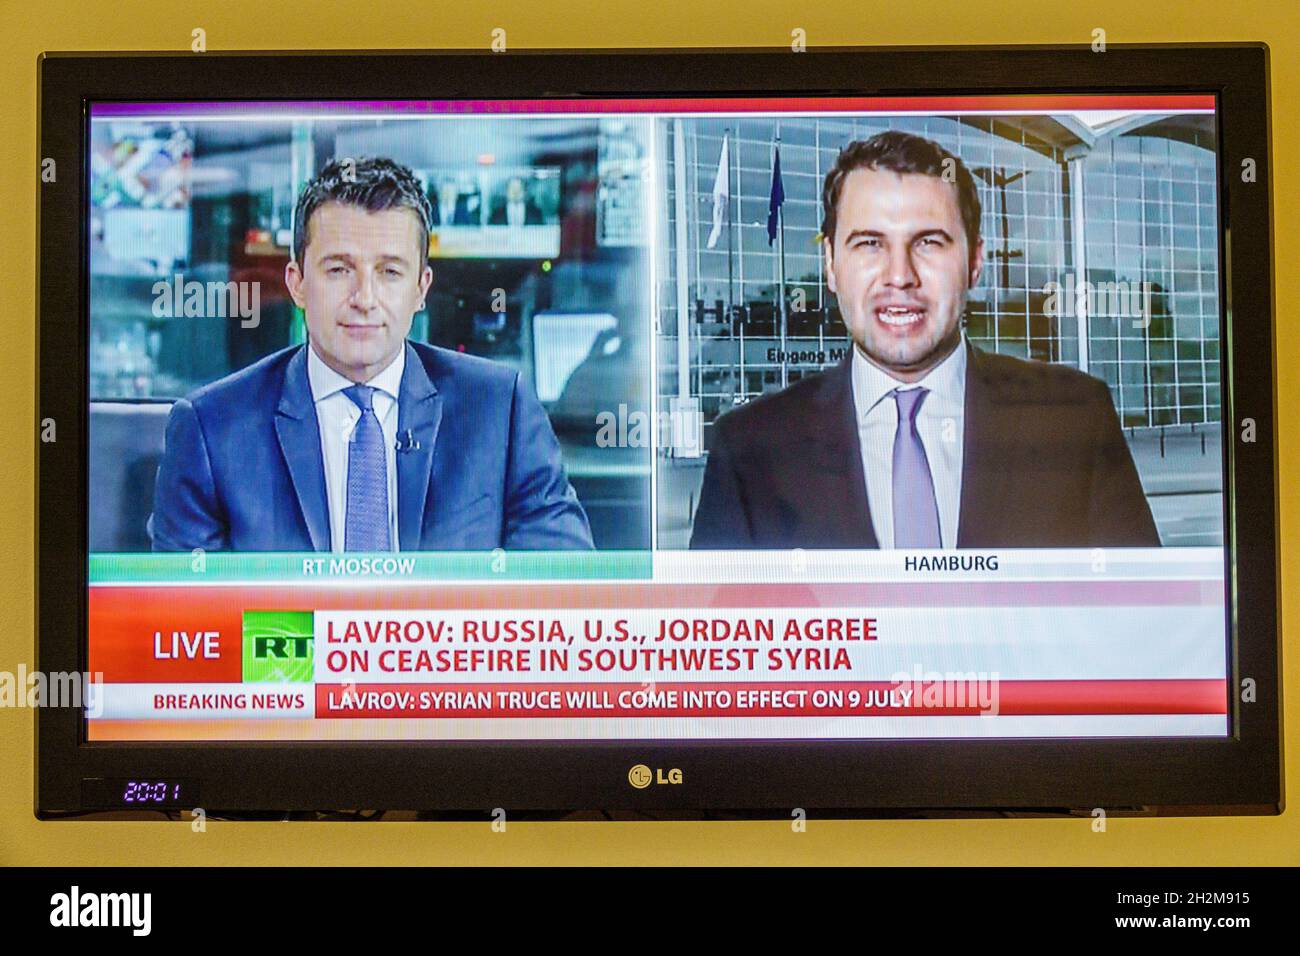 Porto Portugal,television screen tv monitor flat panel,RT Russia Today program,channel breaking Syrian ceasefire news reporter man male Stock Photo